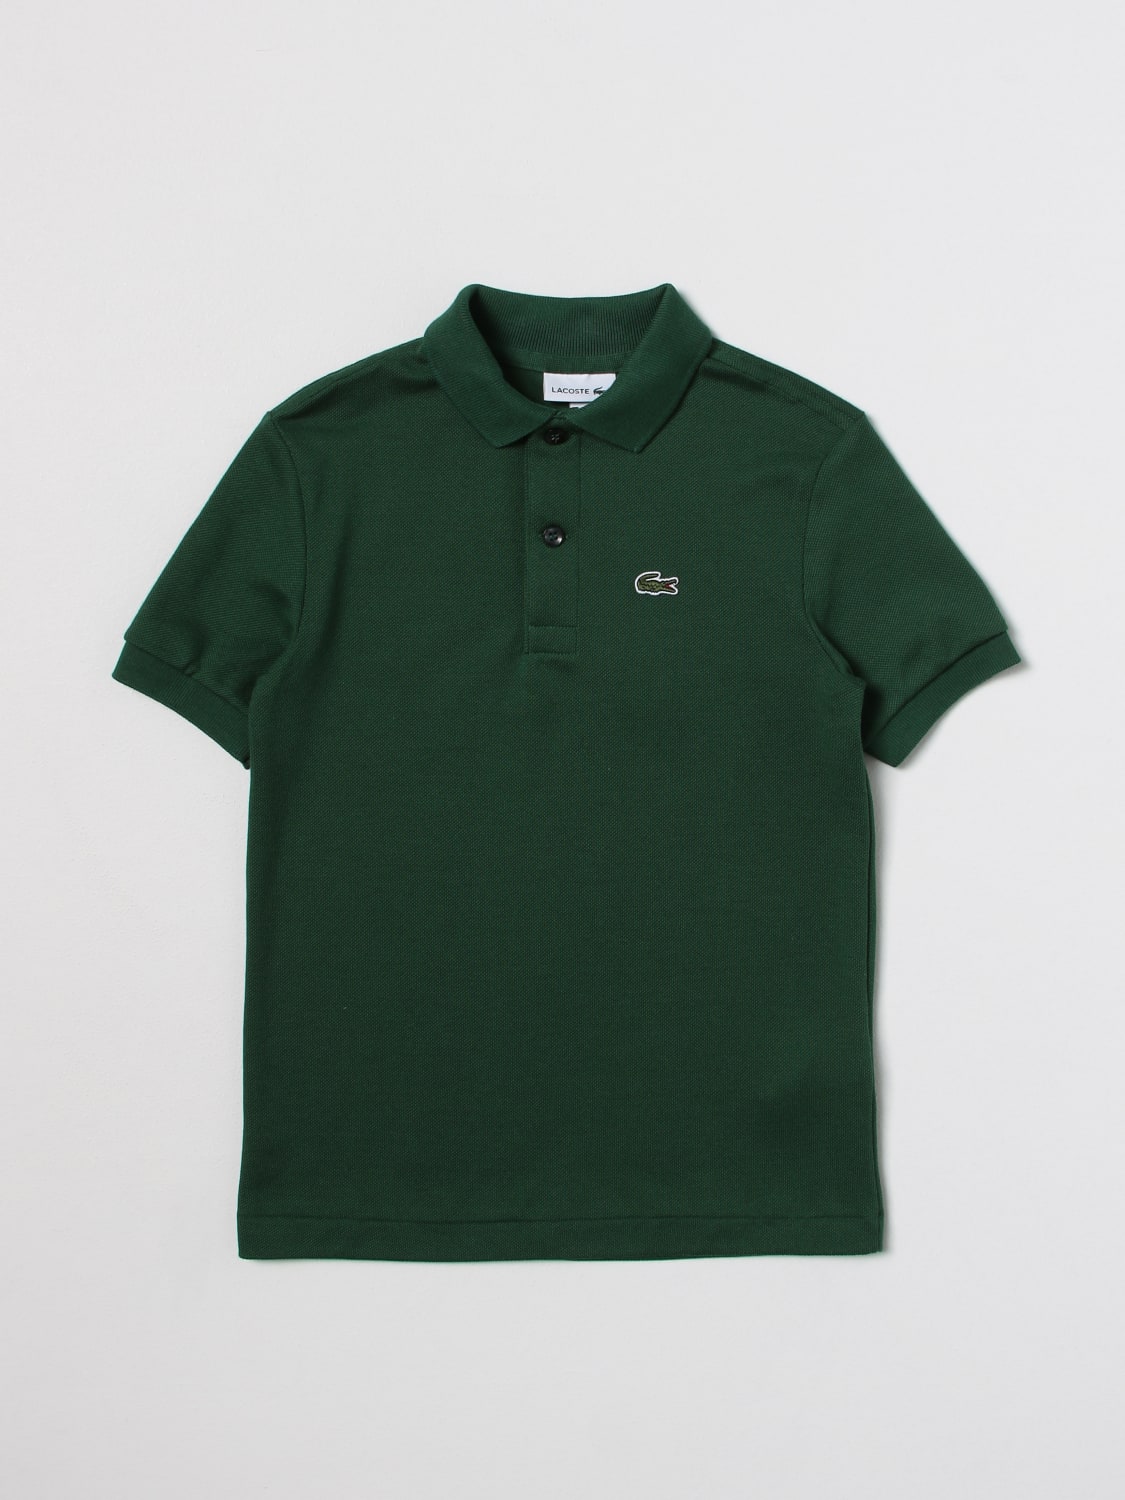 LACOSTE: polo shirt for boys Forest | Lacoste polo shirt PJ2909 on GIGLIO.COM